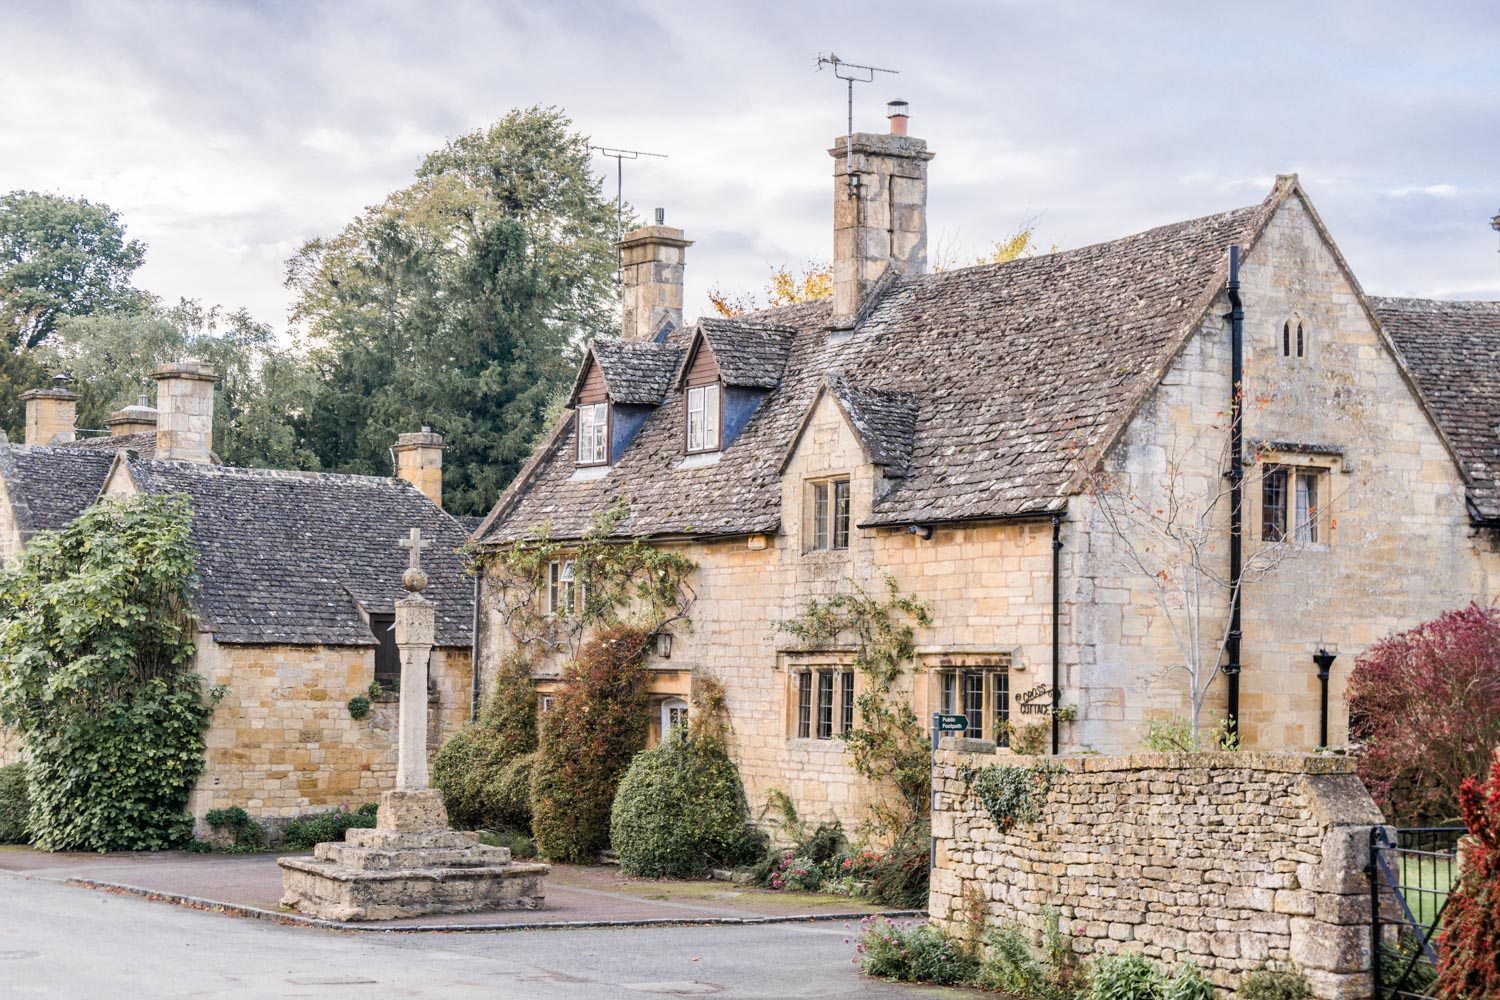 Road trip to the Cotswolds – Broadway, Snowshill & Stanton